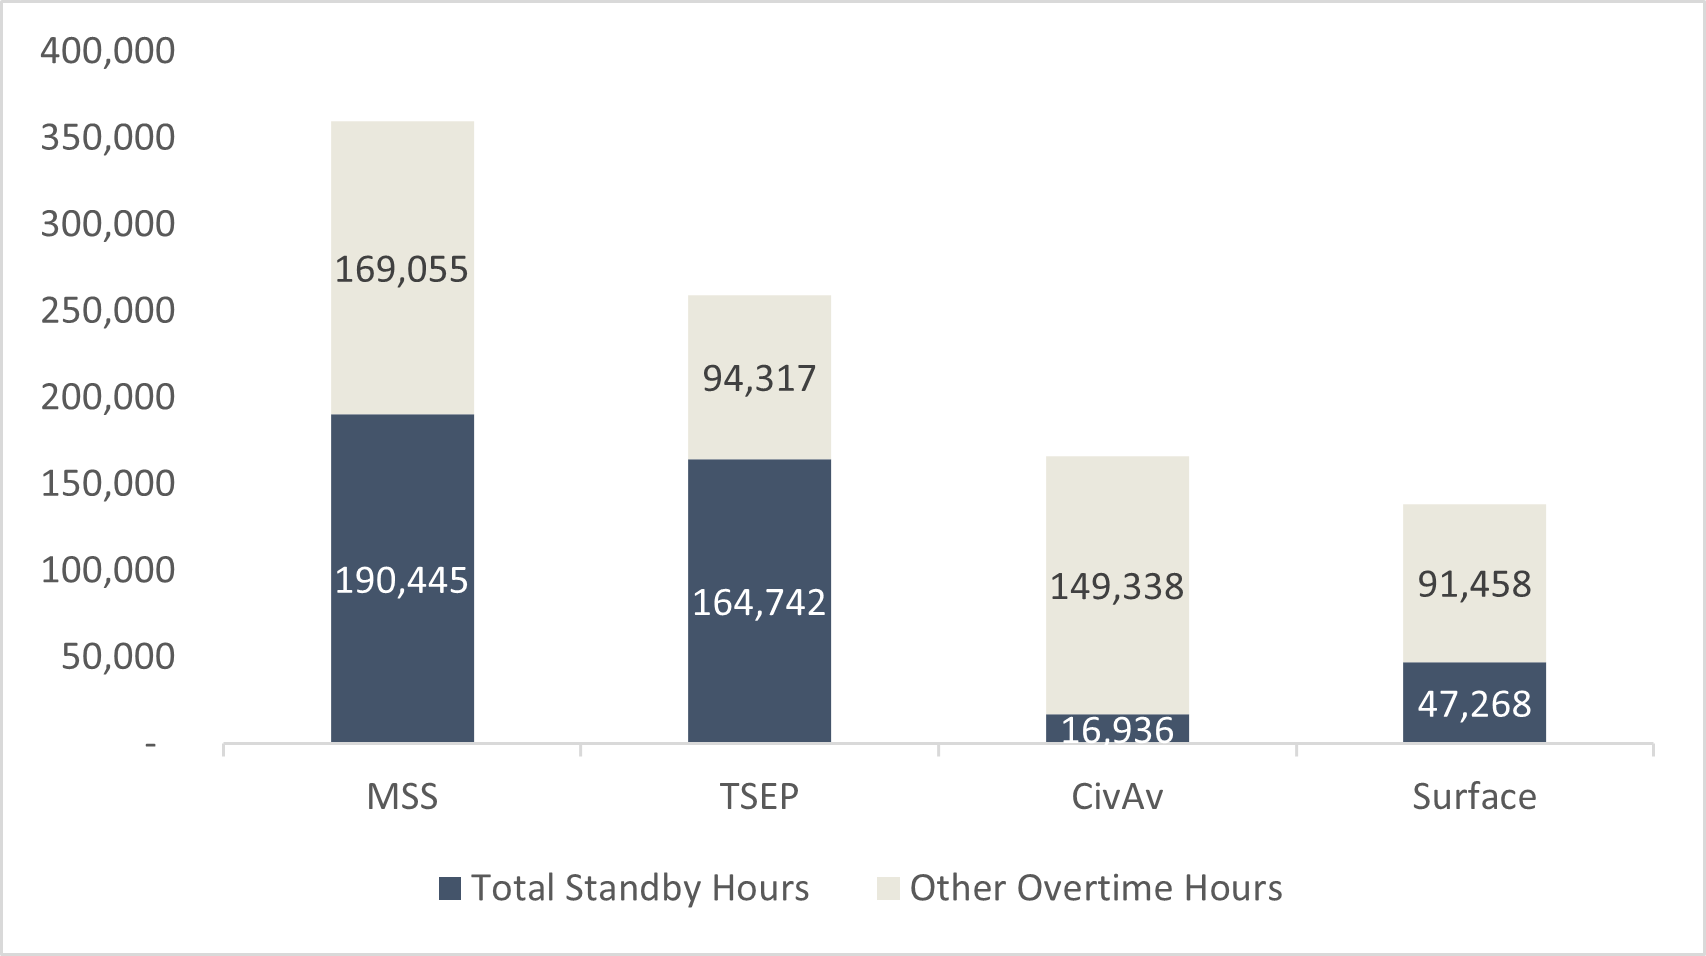 The figure displays the total standby hours compared to other overtime hours in the Safety and Security group between fiscal years 2017-2018 and 2019-2020, broken down by mode. MSS has the highest overtime with 190,445 hours devoted to standby overtime and 169,055 hours devoted to other overtime. Following is TSEP with 164,742 total standby hours compared to 94,317 other overtime hours, CivAv with 16,936 total standby overtime hours compared to 149,338 other overtime hours, and Surface with 47,268 total standby overtime hours compared to 91,458 other overtime hours.